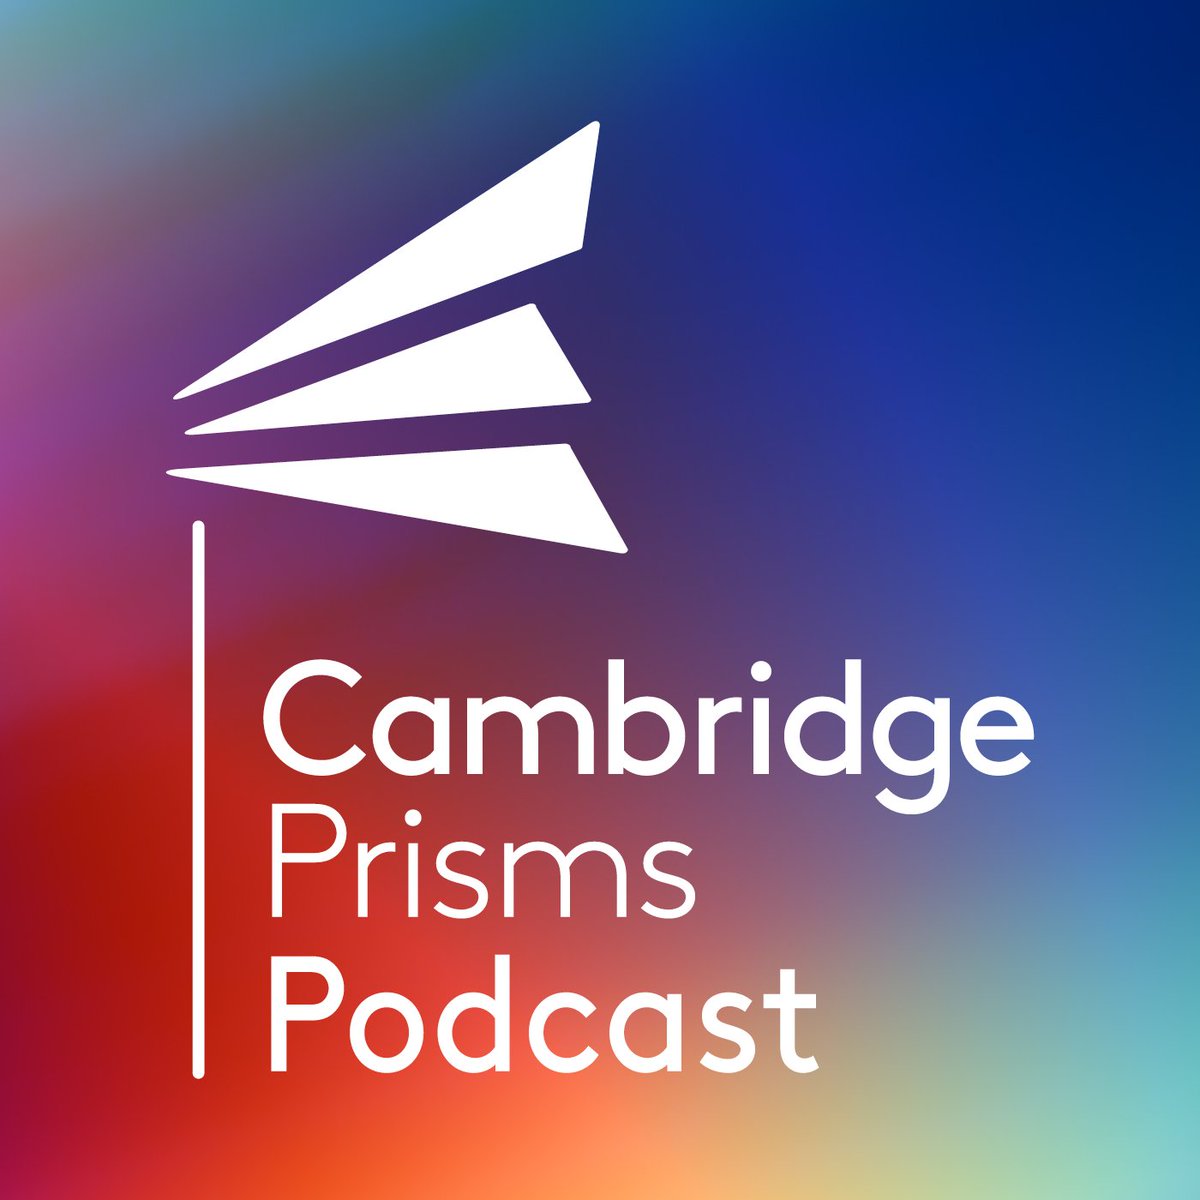 Have you listened to the @CambridgePrisms podcast with @NakedScientists yet? We currently have 5 episodes covering topics from #extinction, #mentalhealth, #precisionmedicine, #plasticpollution, #coastal science & #water conservation Subscribe today: bit.ly/493QenD